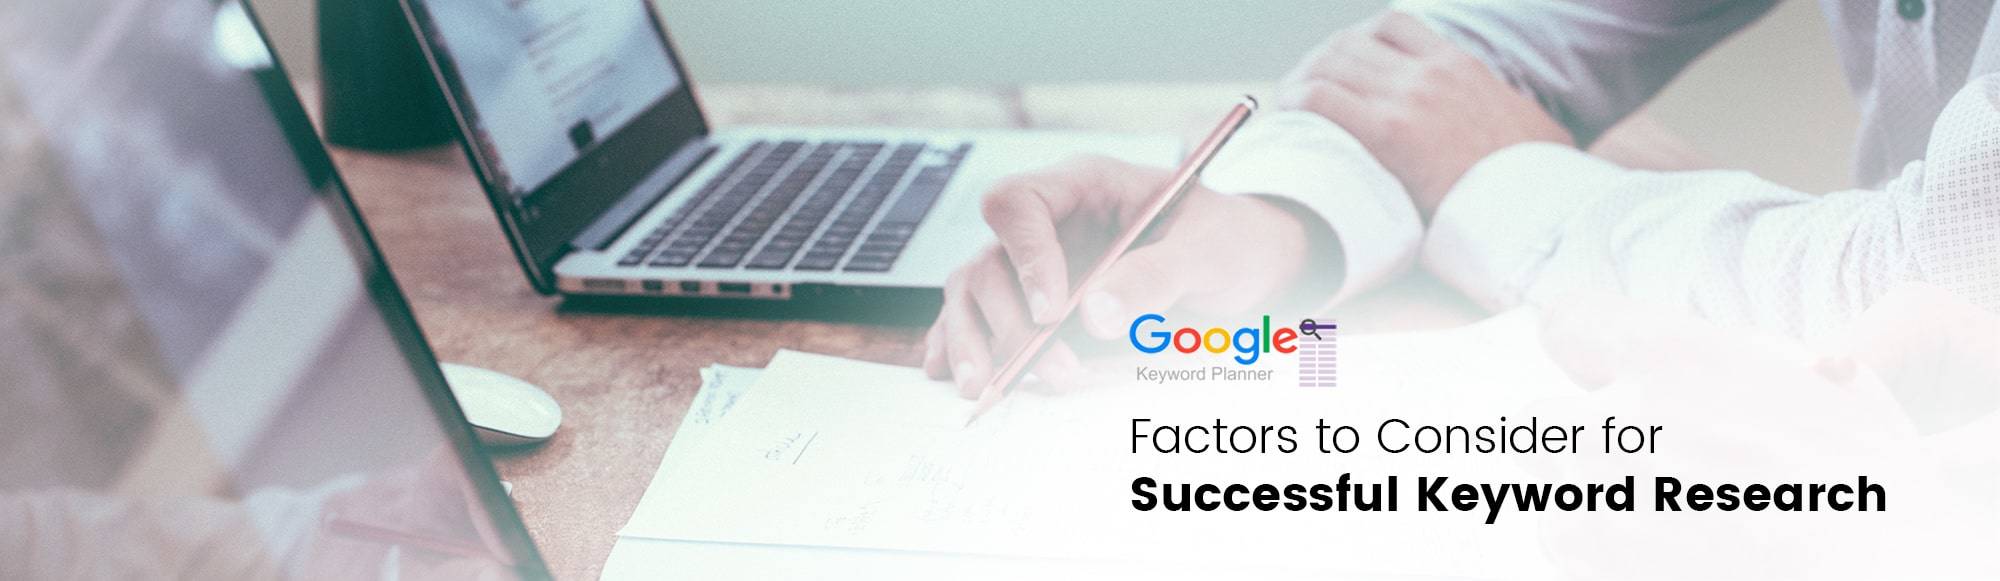 Factors to Consider for Successful Keyword Research